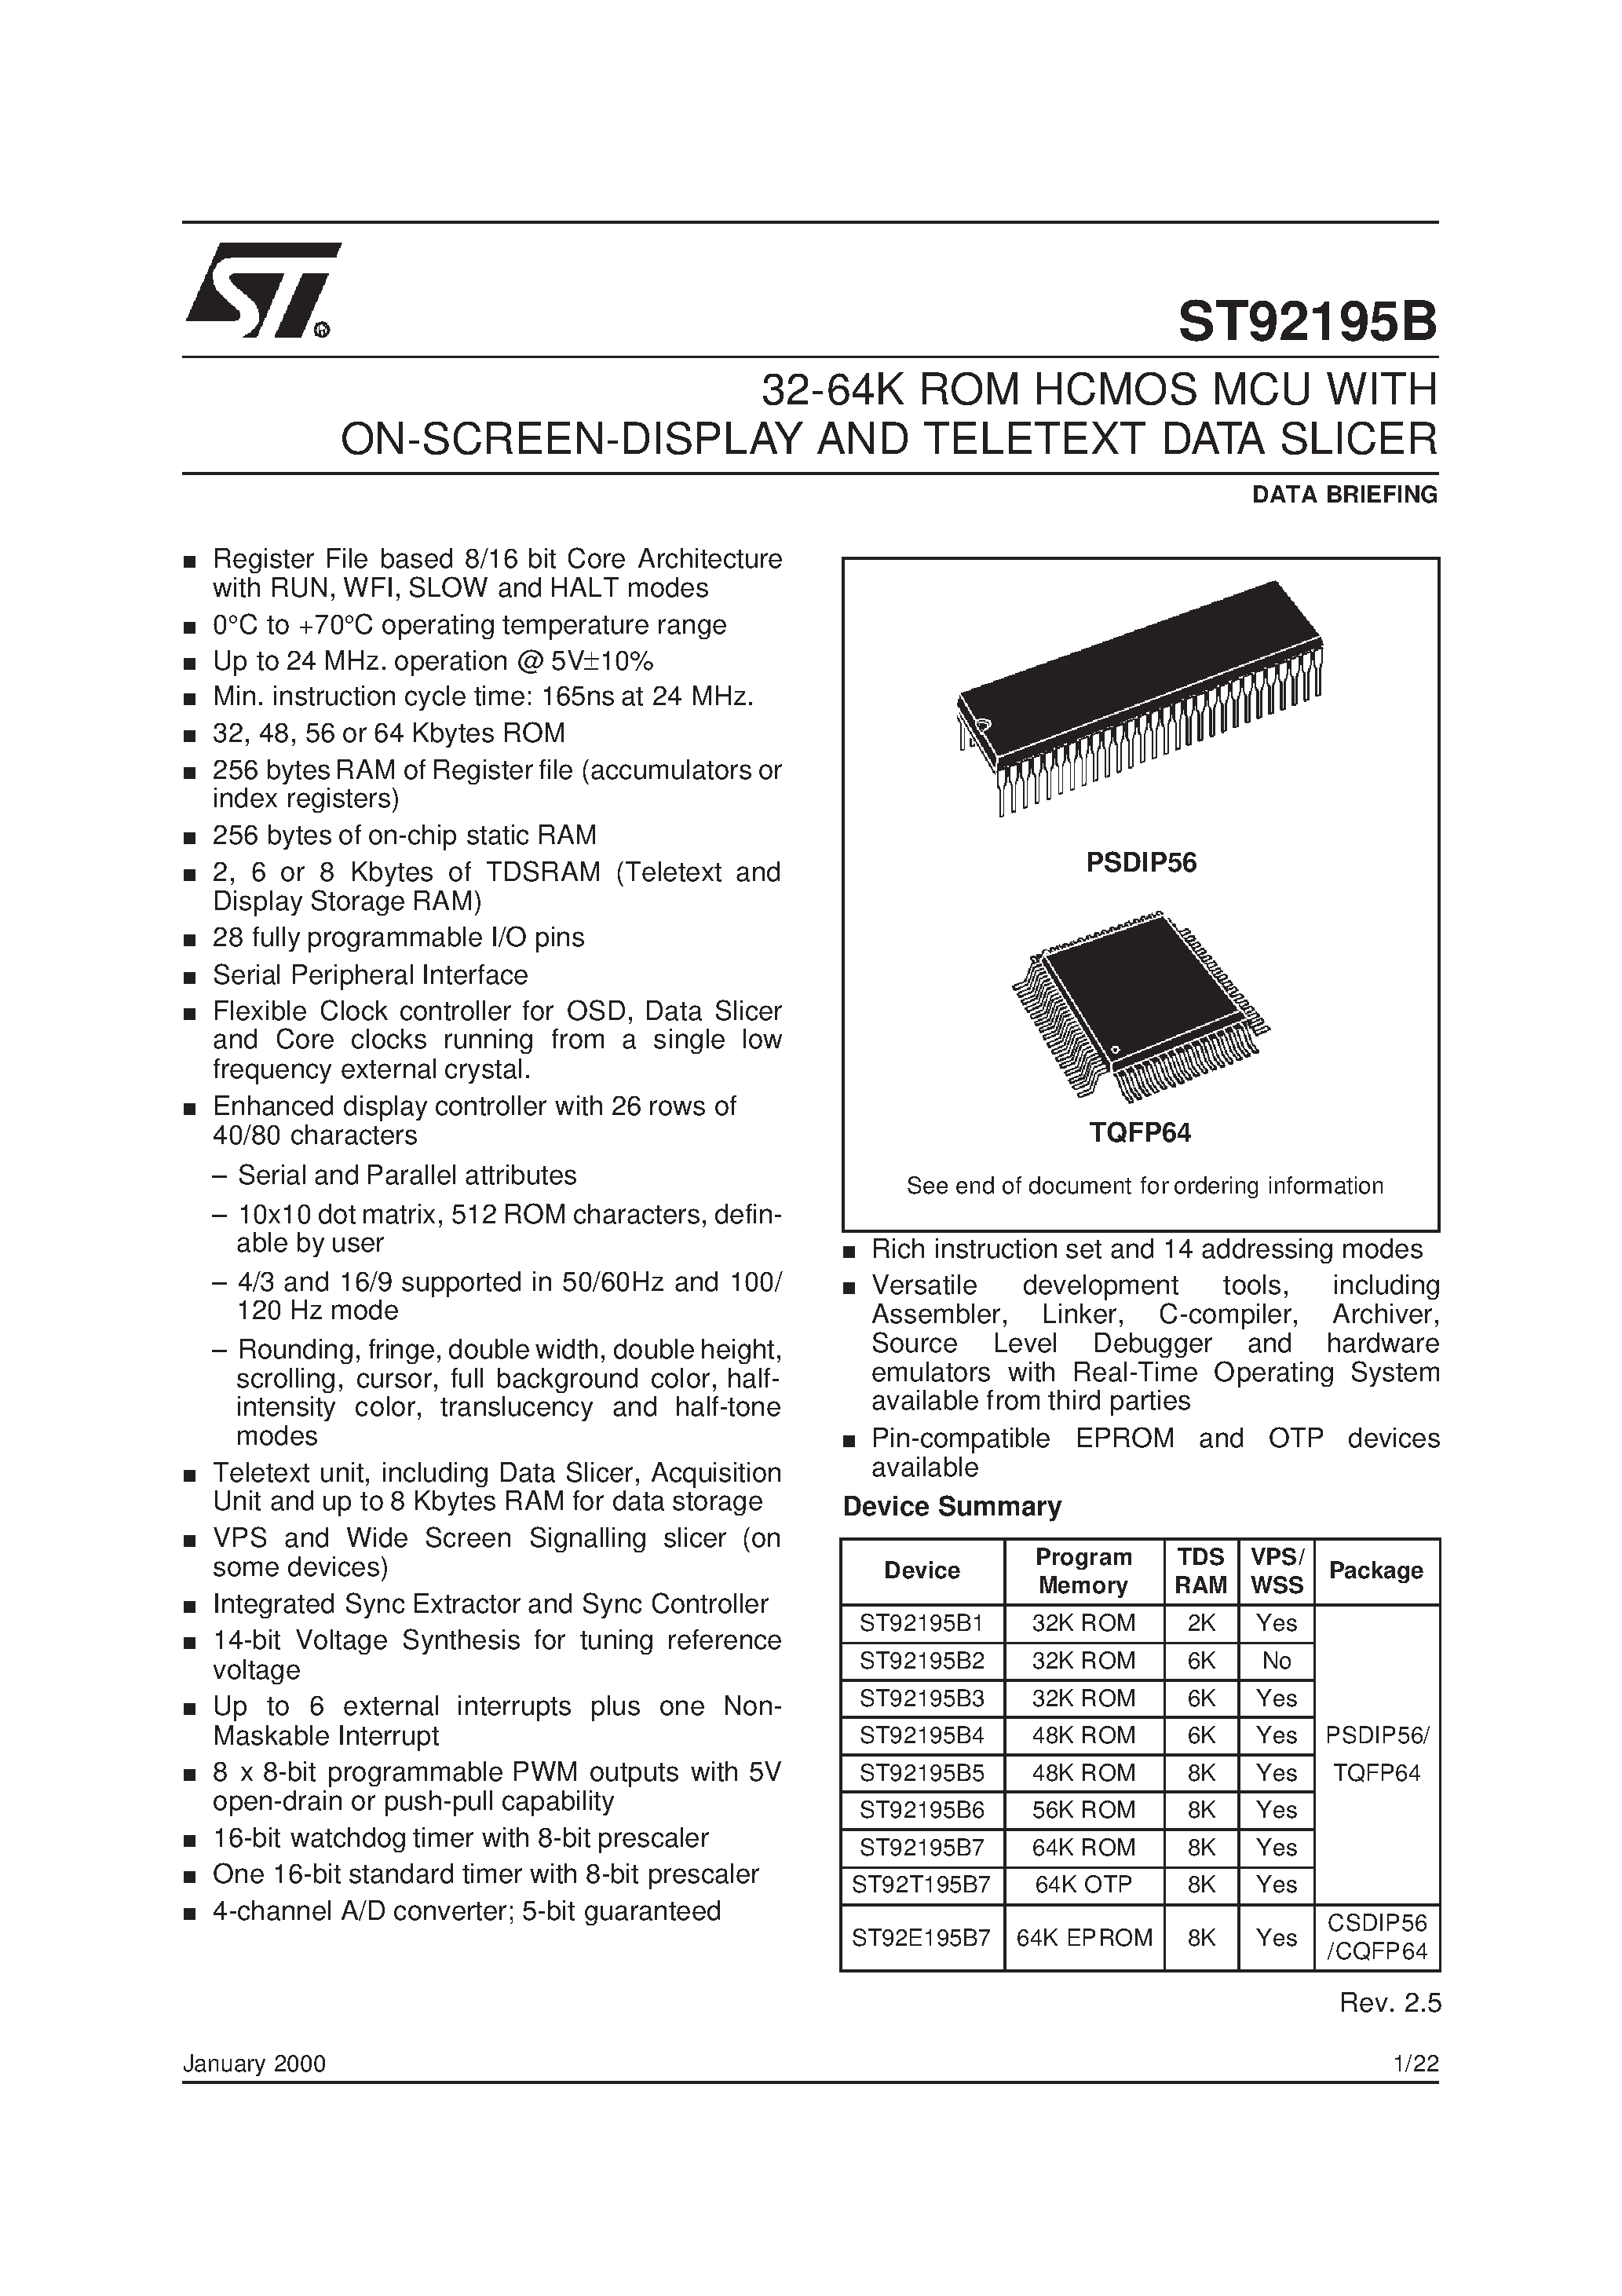 Datasheet ST92195B - 32-64K ROM HCMOS MCU WITH ON-SCREEN-DISPLAY AND TELETEXT DATA SLICER page 1